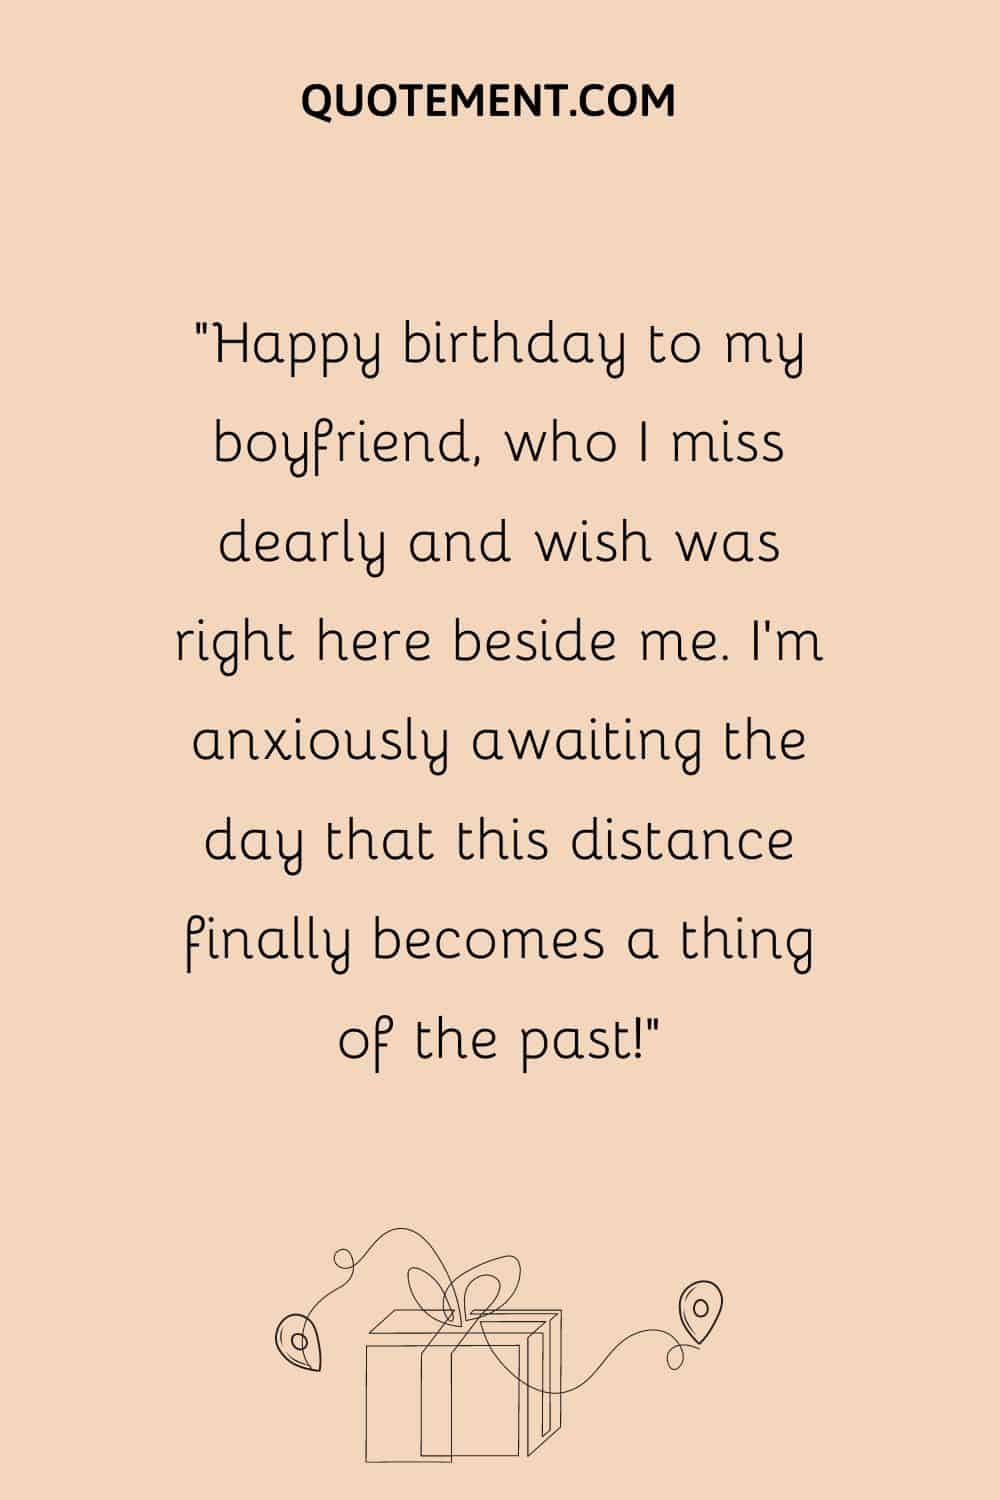 “Happy birthday to my boyfriend, who I miss dearly and wish was right here beside me. I’m anxiously awaiting the day that this distance finally becomes a thing of the past!”